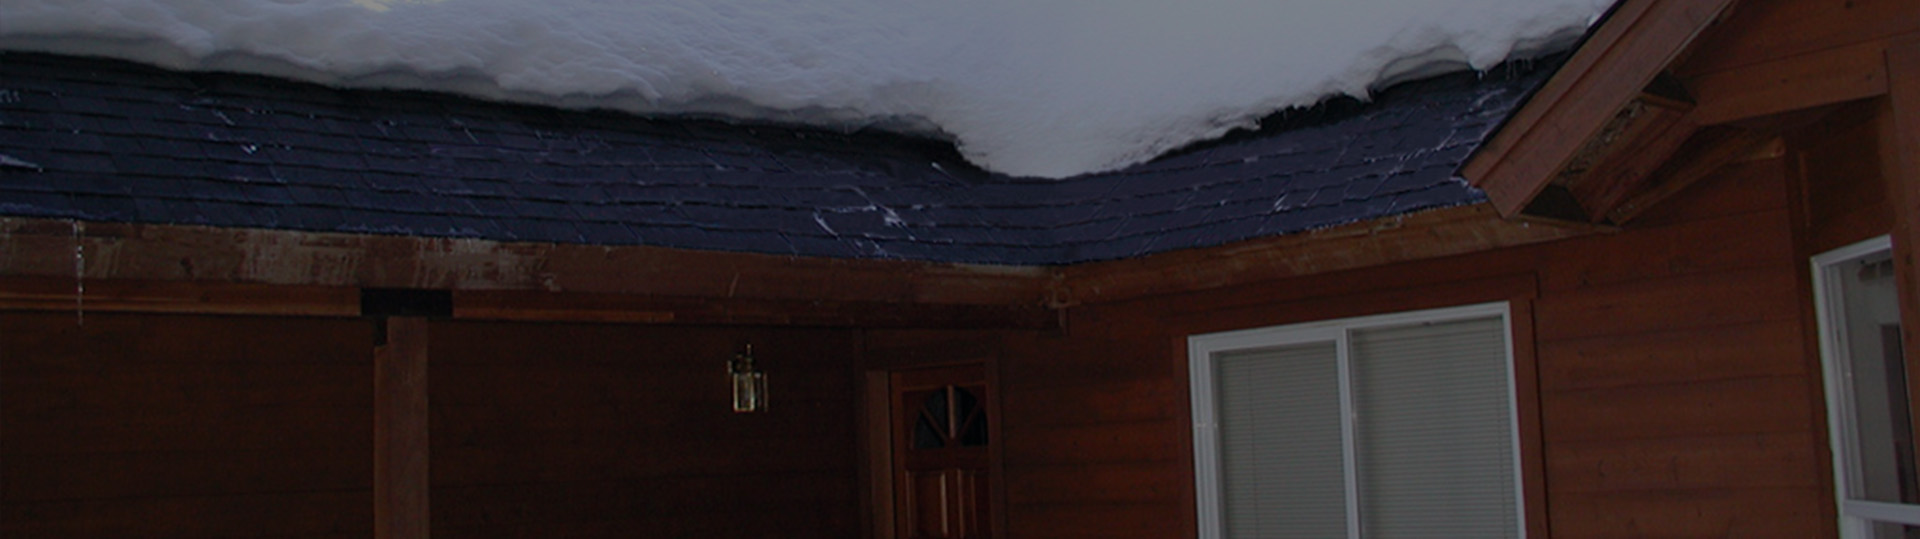 Self-regulating heat trace cable for roof de-icing systems banner